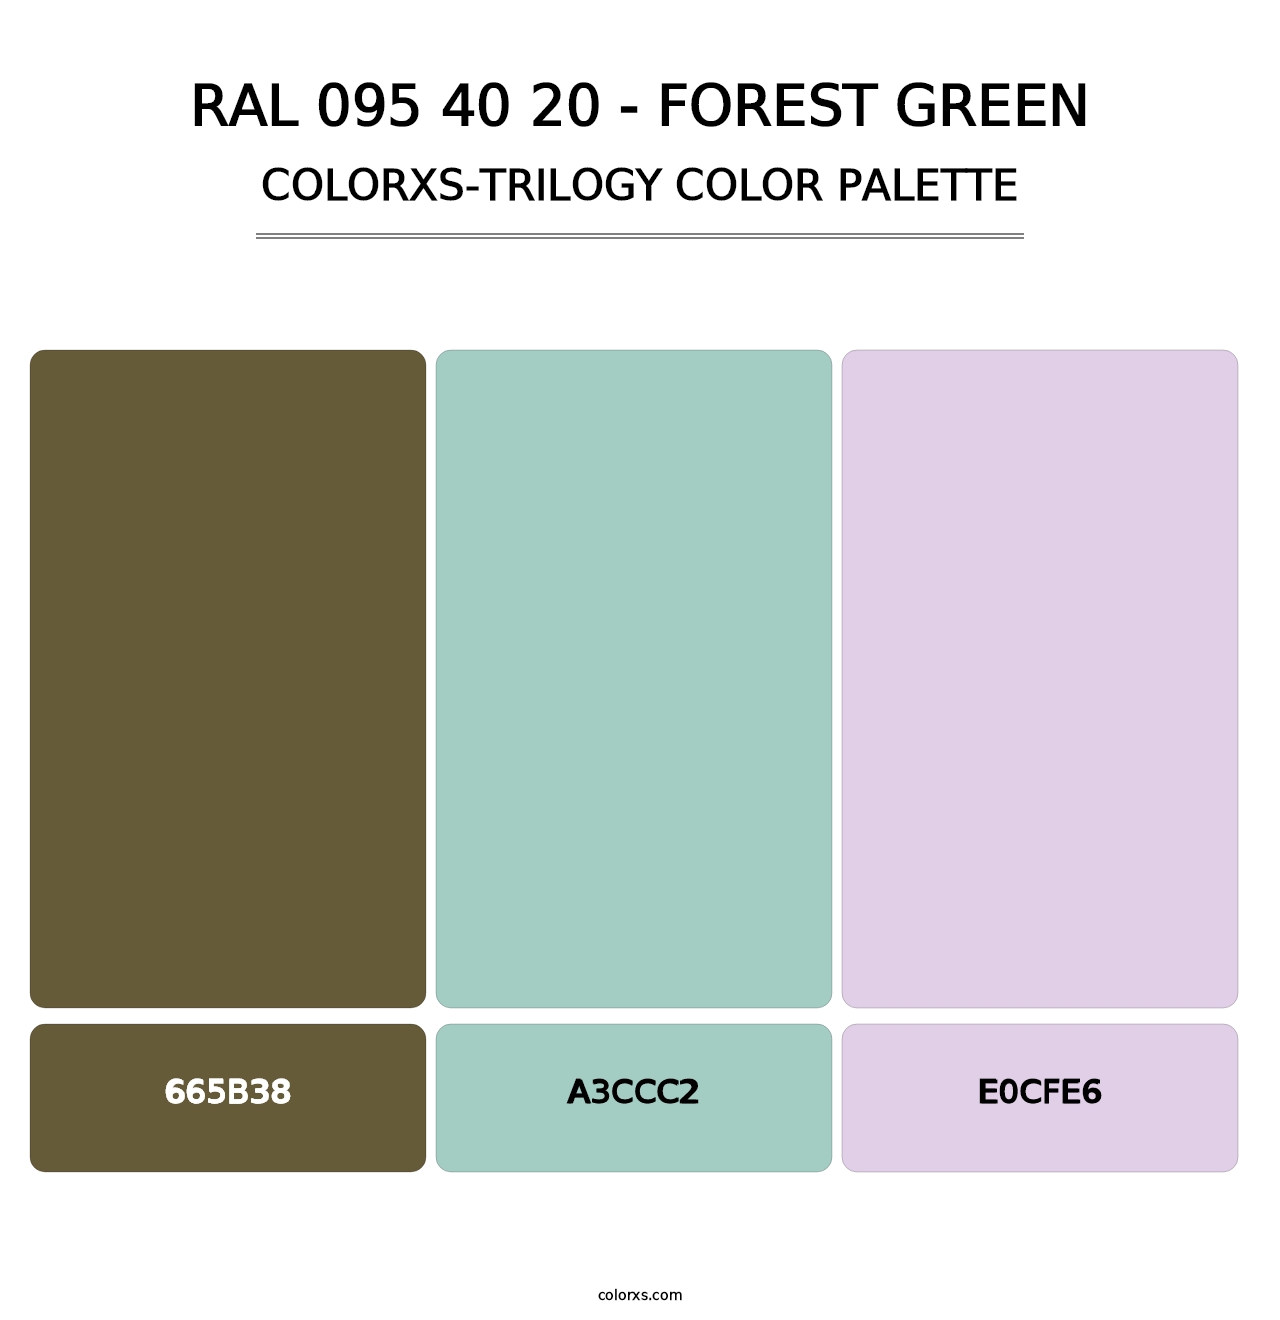 RAL 095 40 20 - Forest Green - Colorxs Trilogy Palette